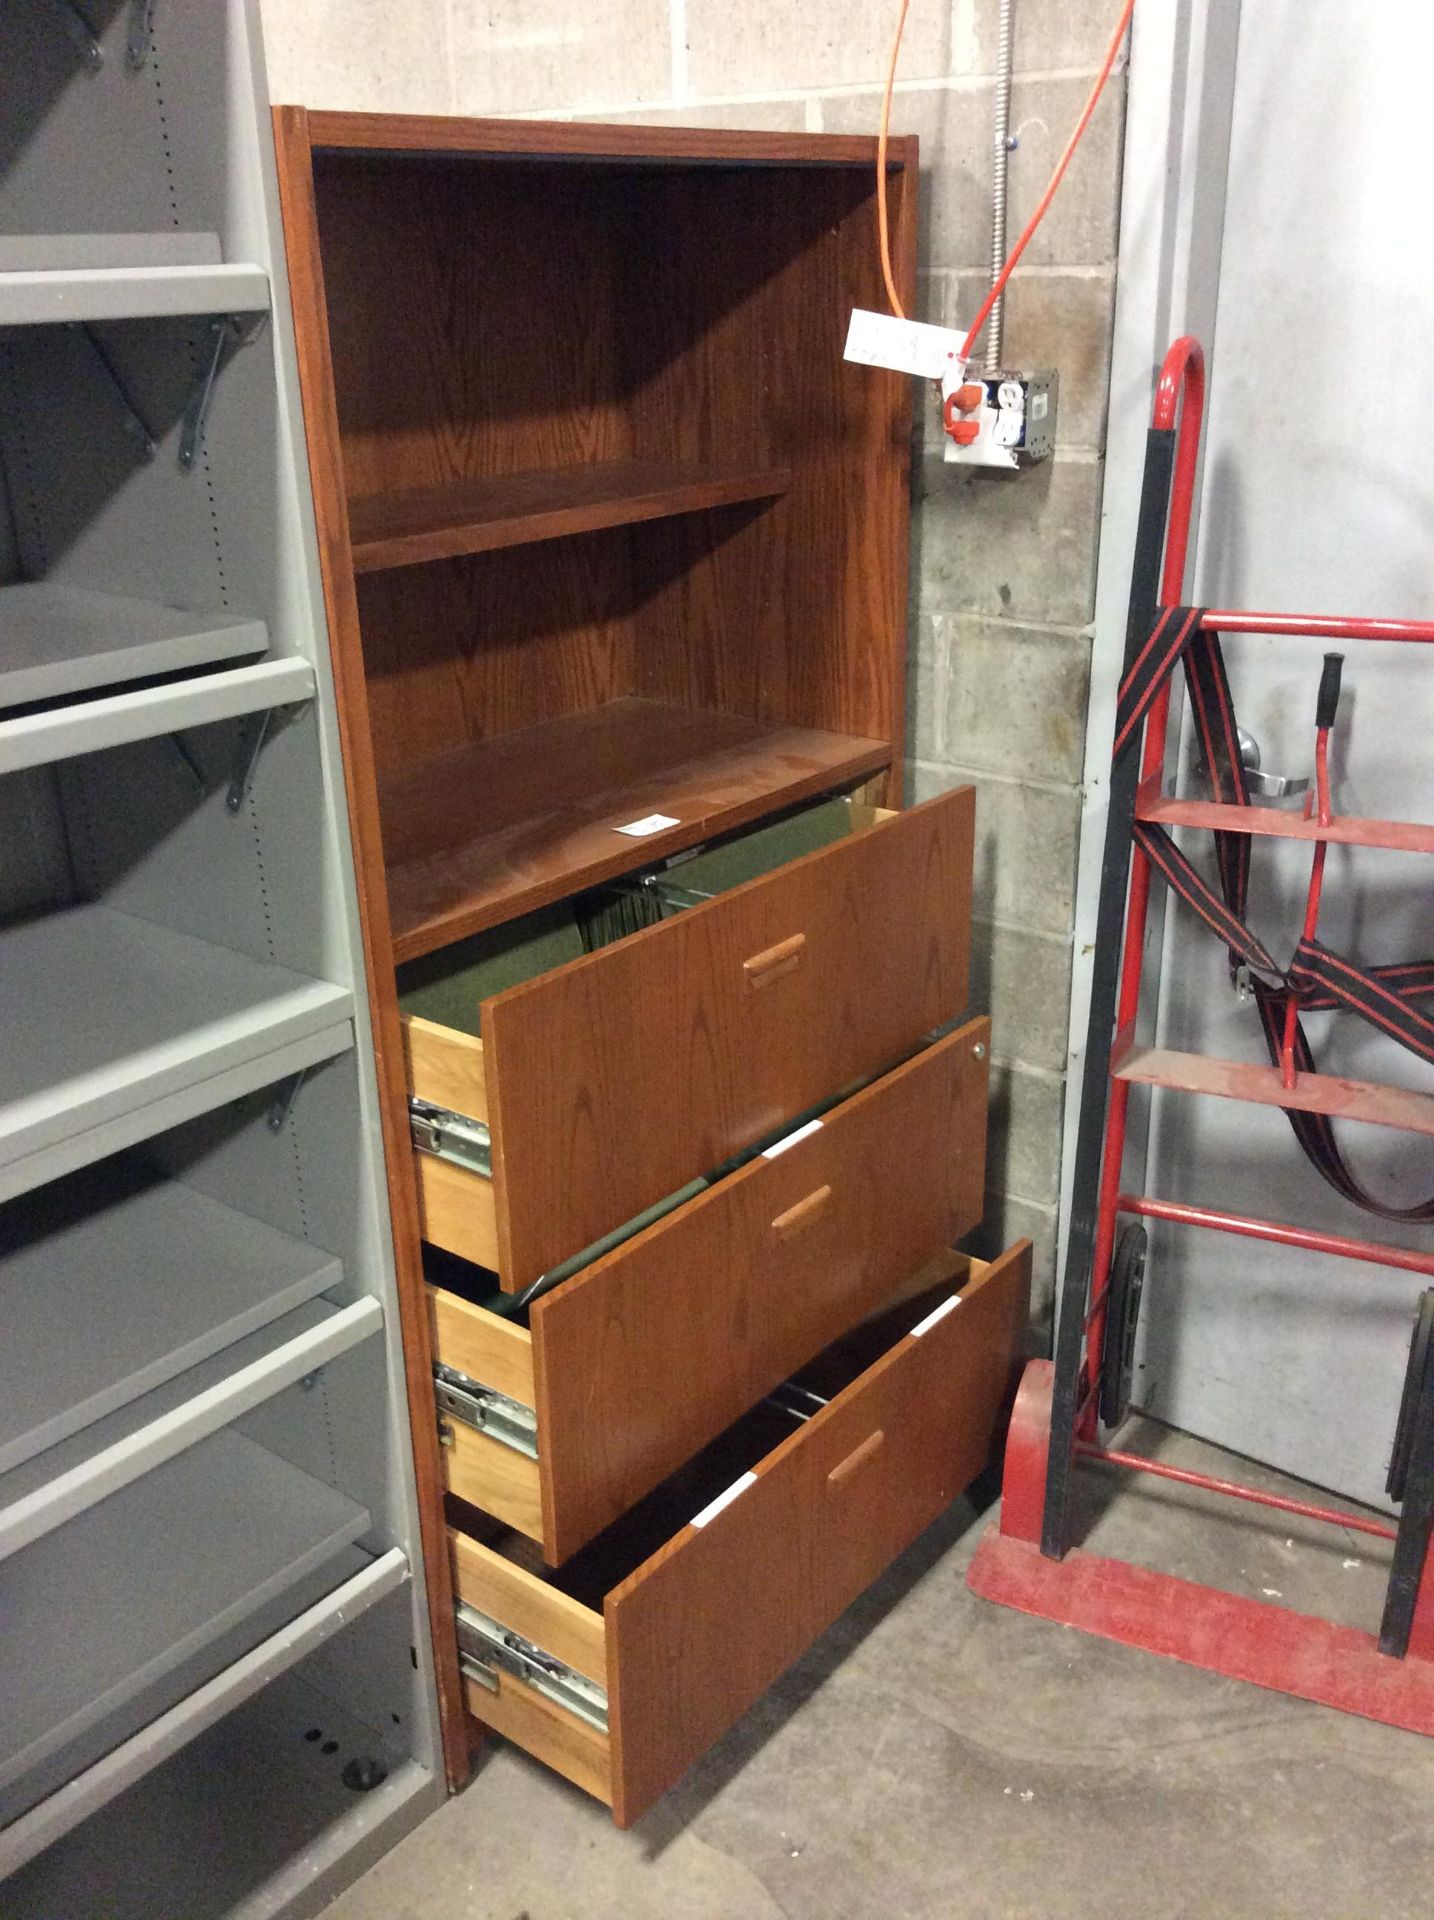 2 Shelf Wooden Storage Case with 3 Lateral Drawers - Image 2 of 2